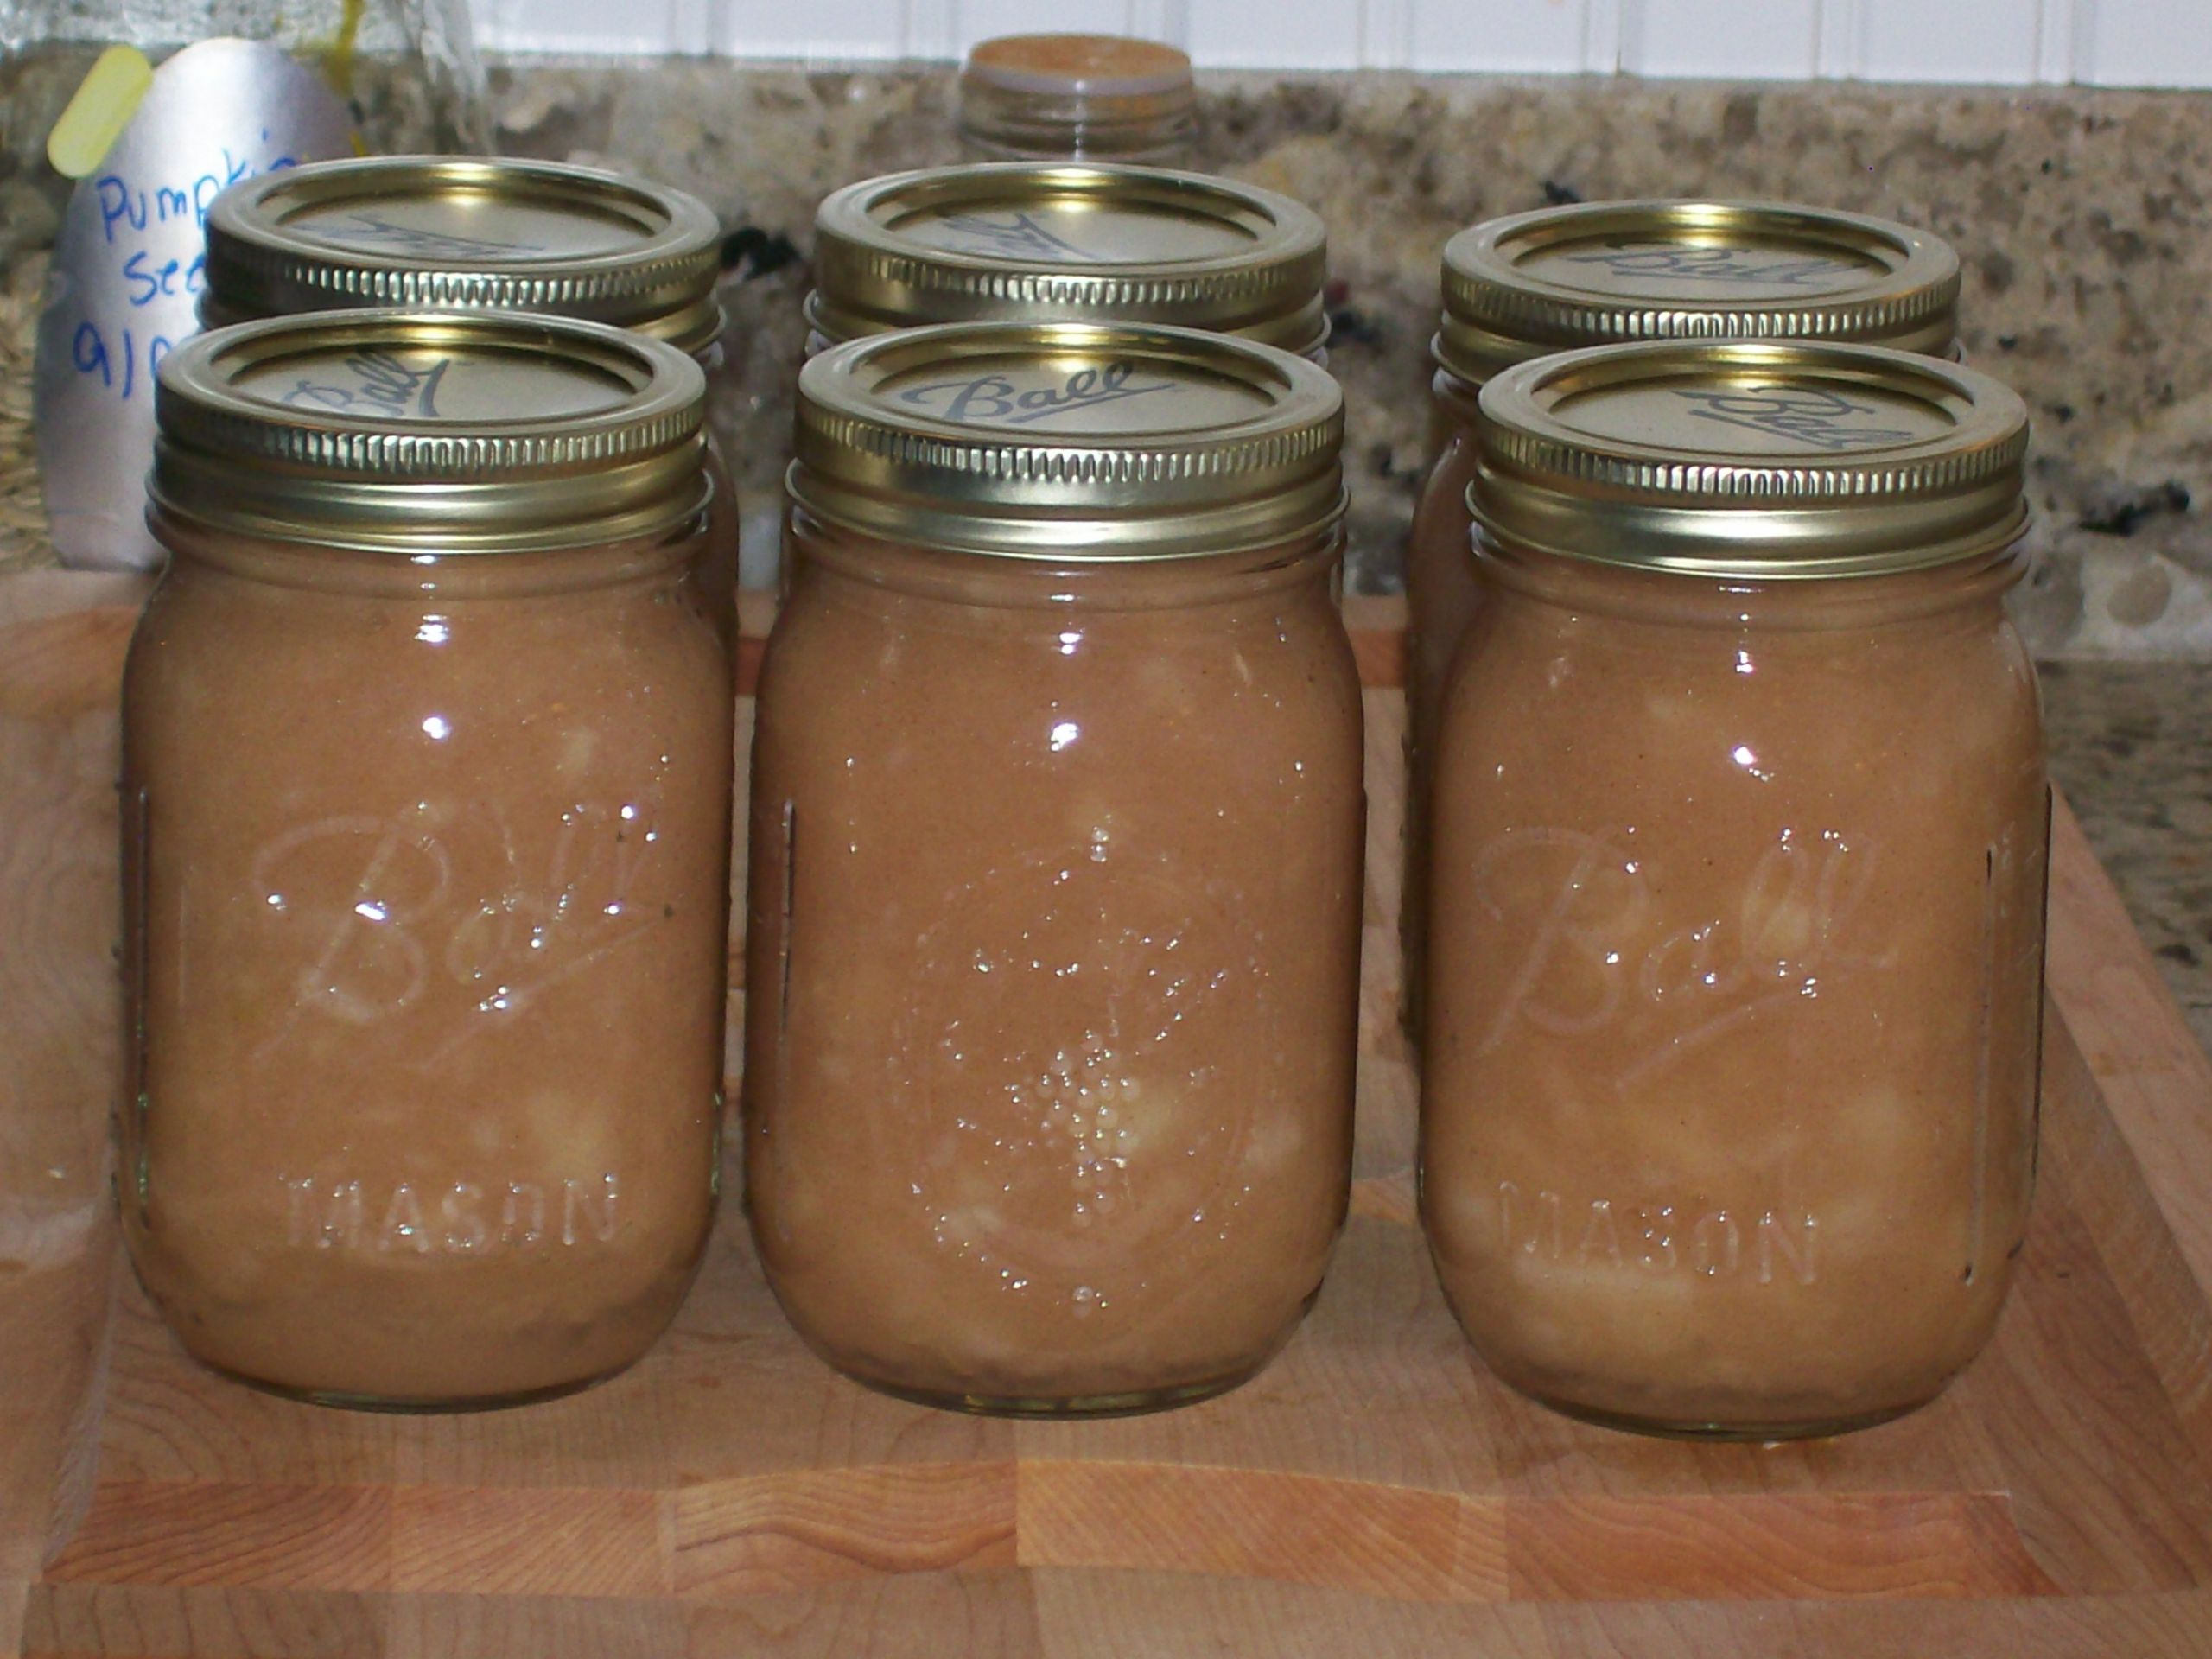 Applesauce Recipe For Canning
 Canning Applesauce